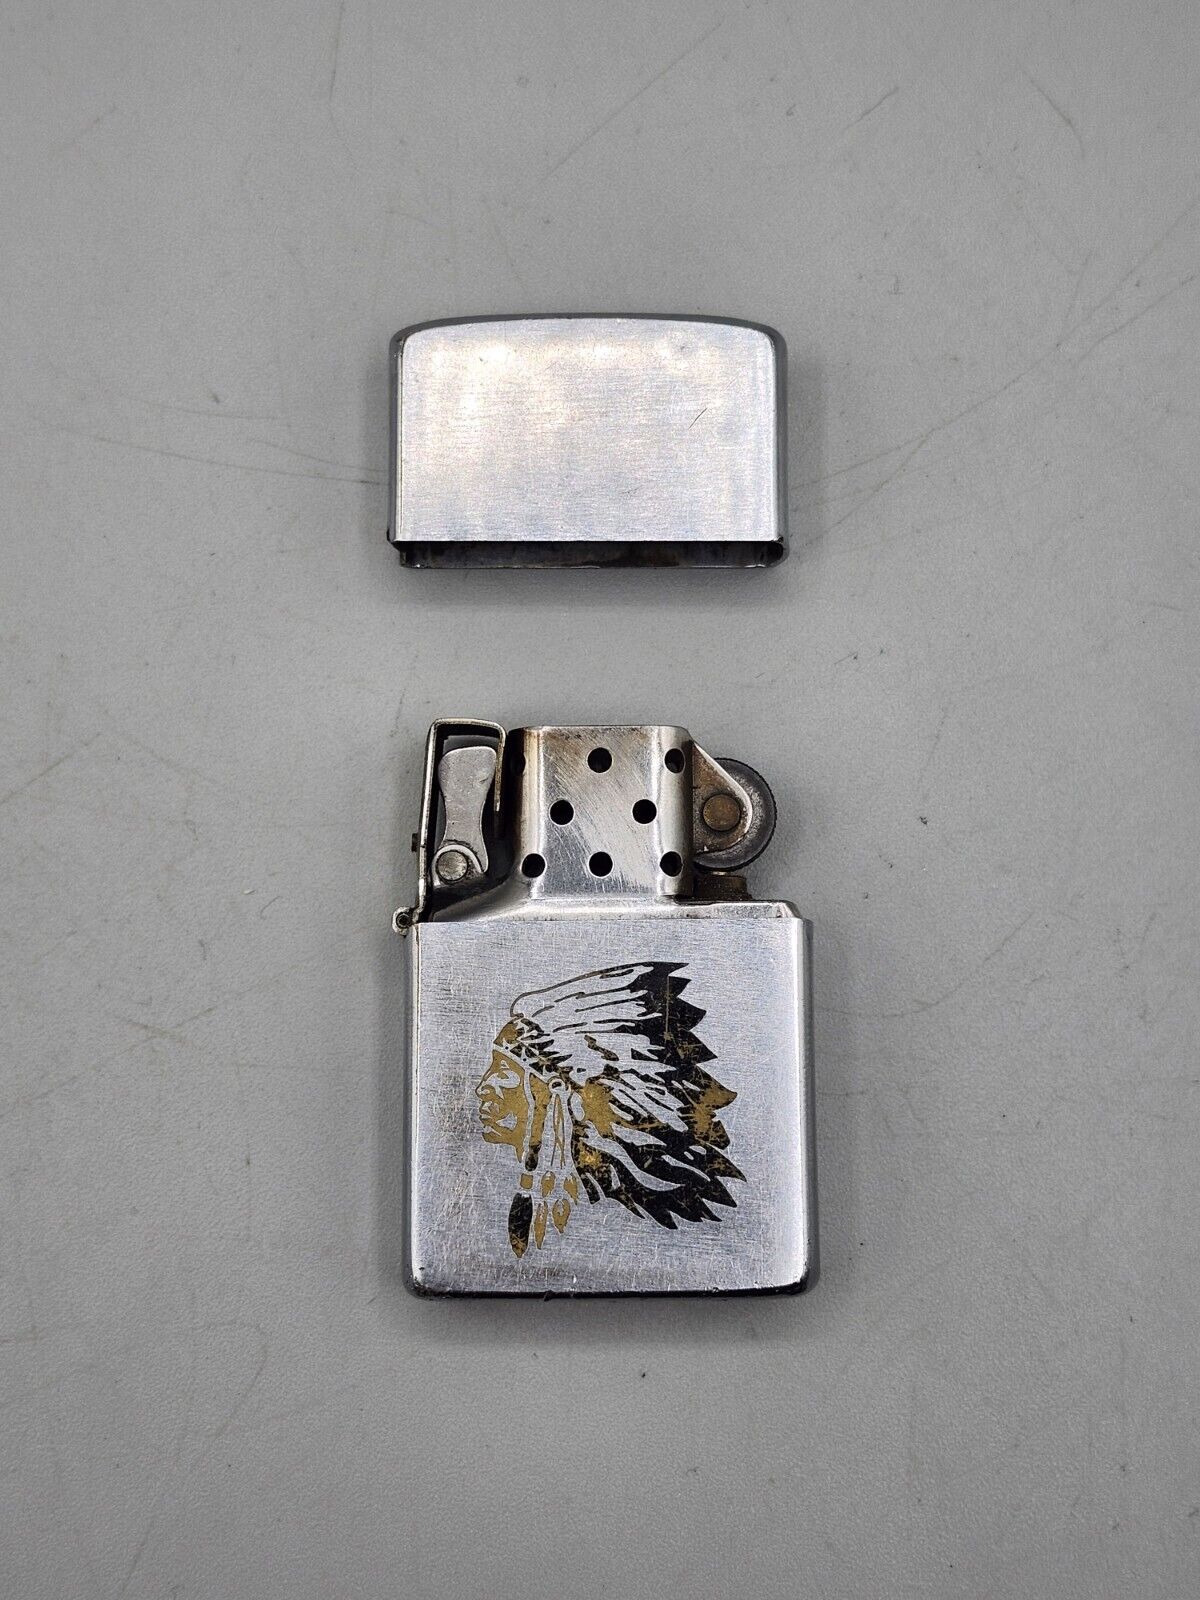 VINTAGE NATIVE AMERICAN INDIAN CHIEF ZIPPO LIGHTER 1980